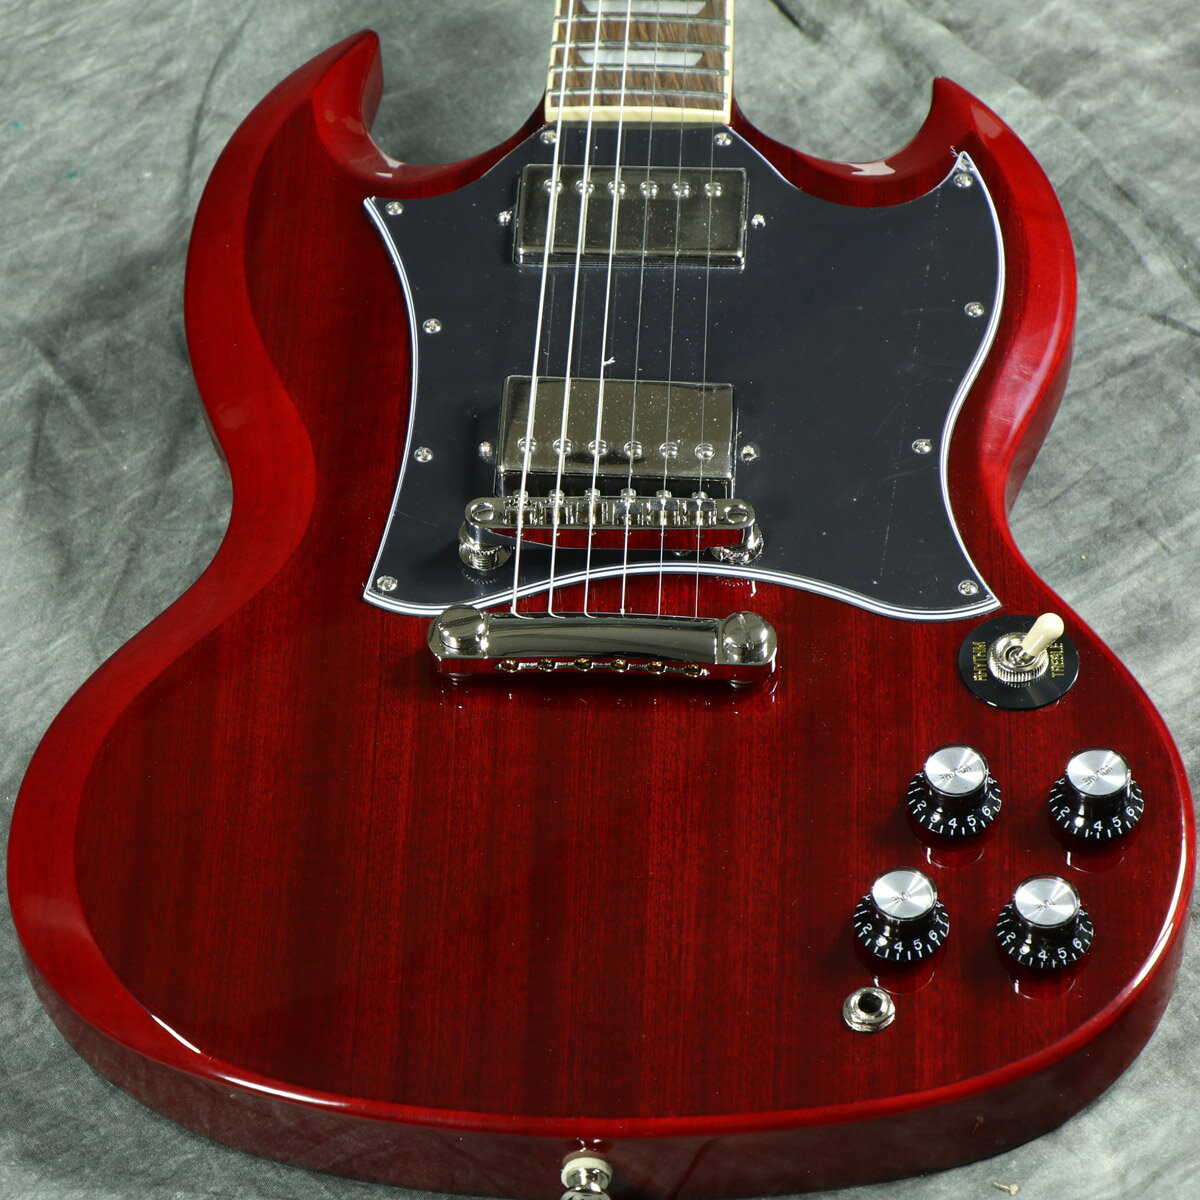 Epiphone / Inspired by Gibson 